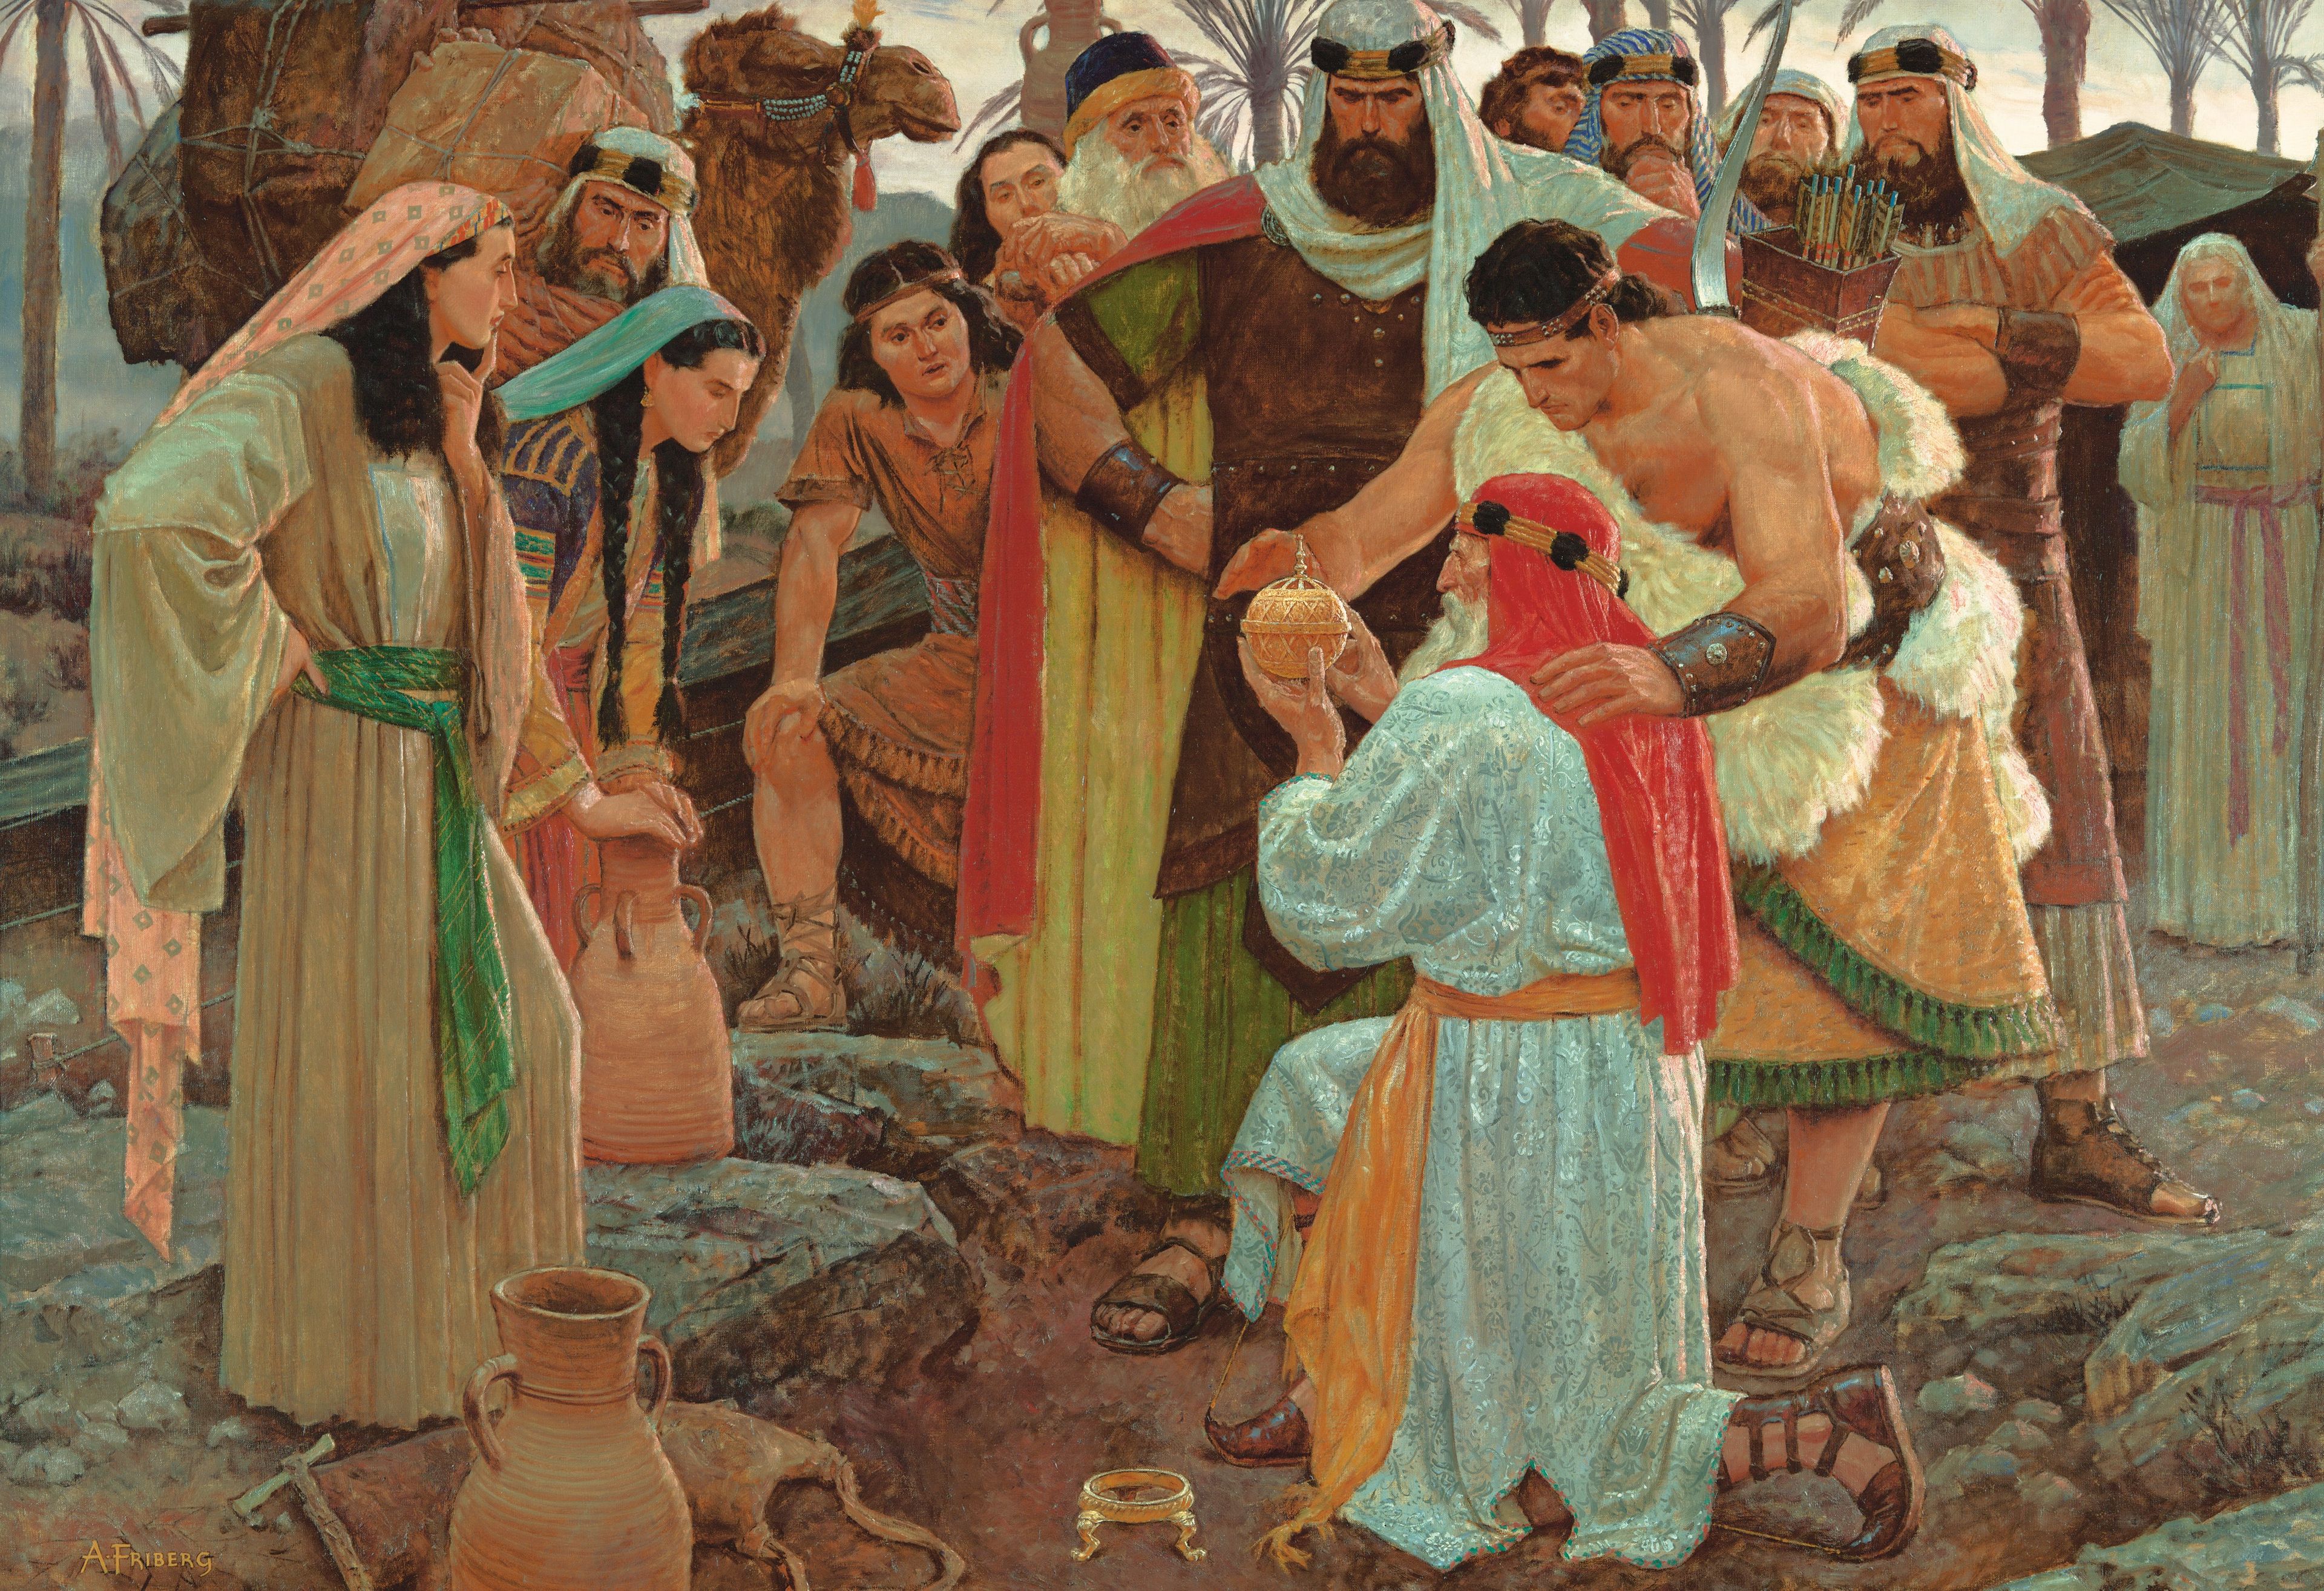 The Liahona, by Arnold Friberg (62041); GAK 302; GAB 68; Primary manual 4-15; 1 Nephi 16:10, 26–29; Alma 37:38–46